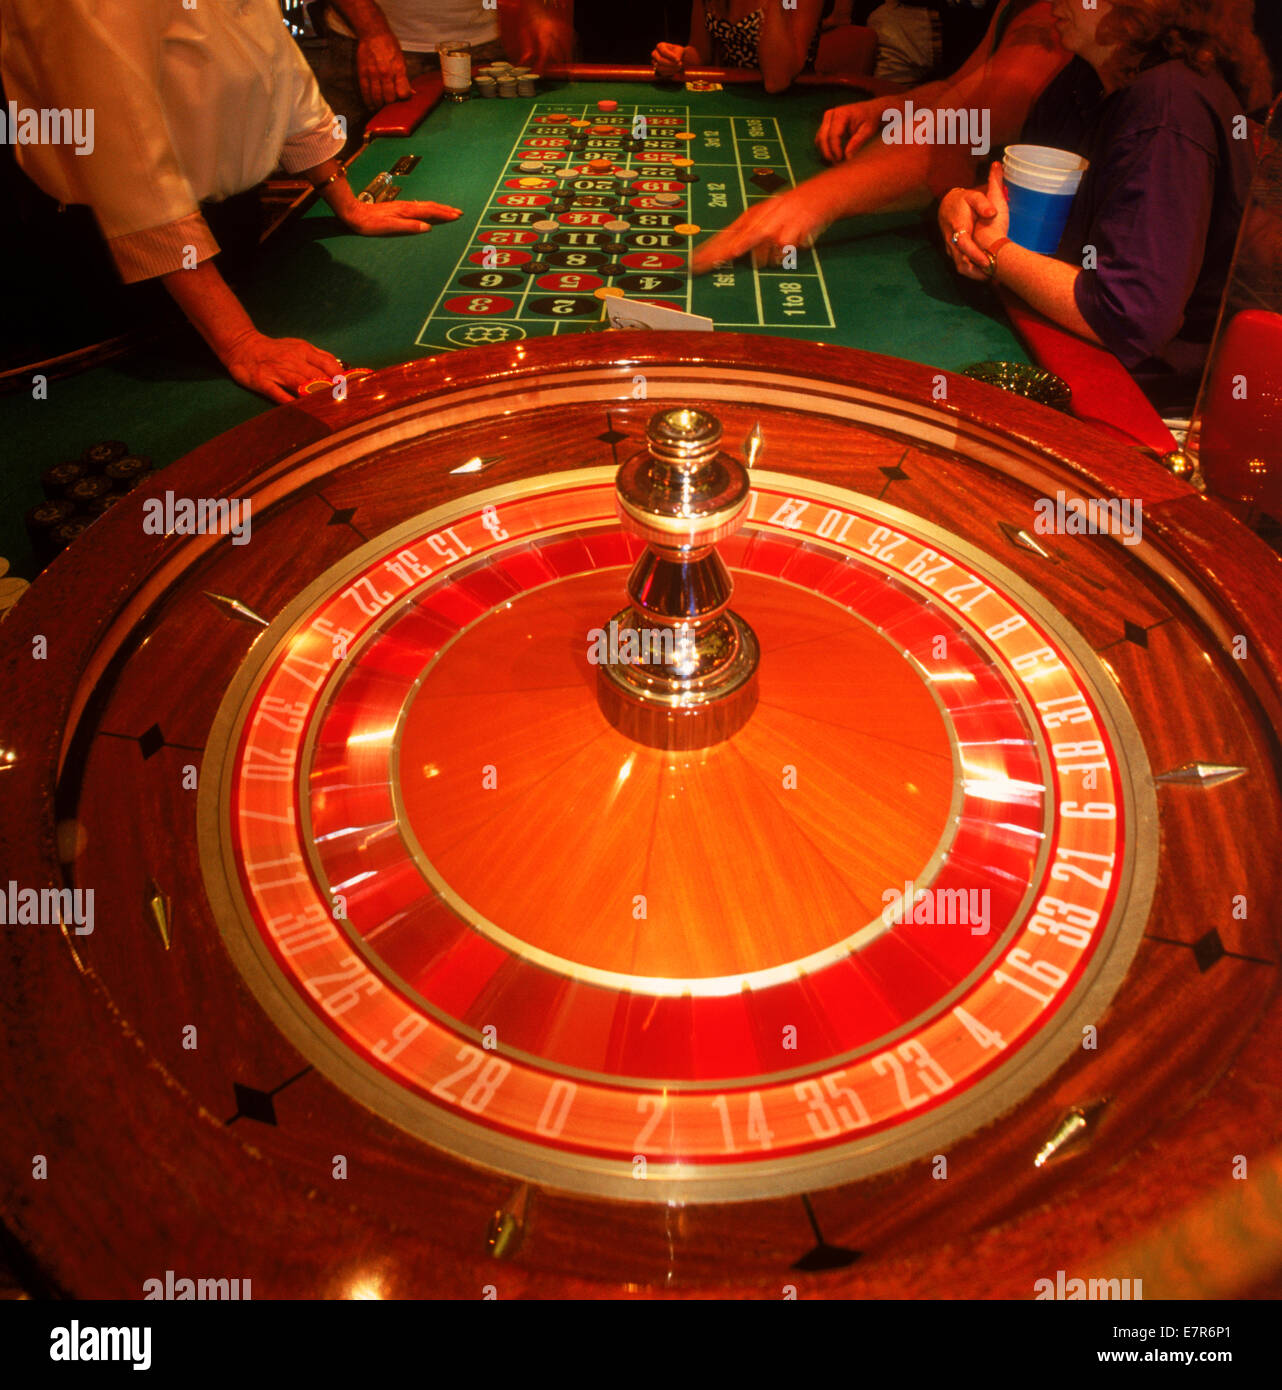 Gambling at the roulette table with chips and spinning wheel Stock Photo